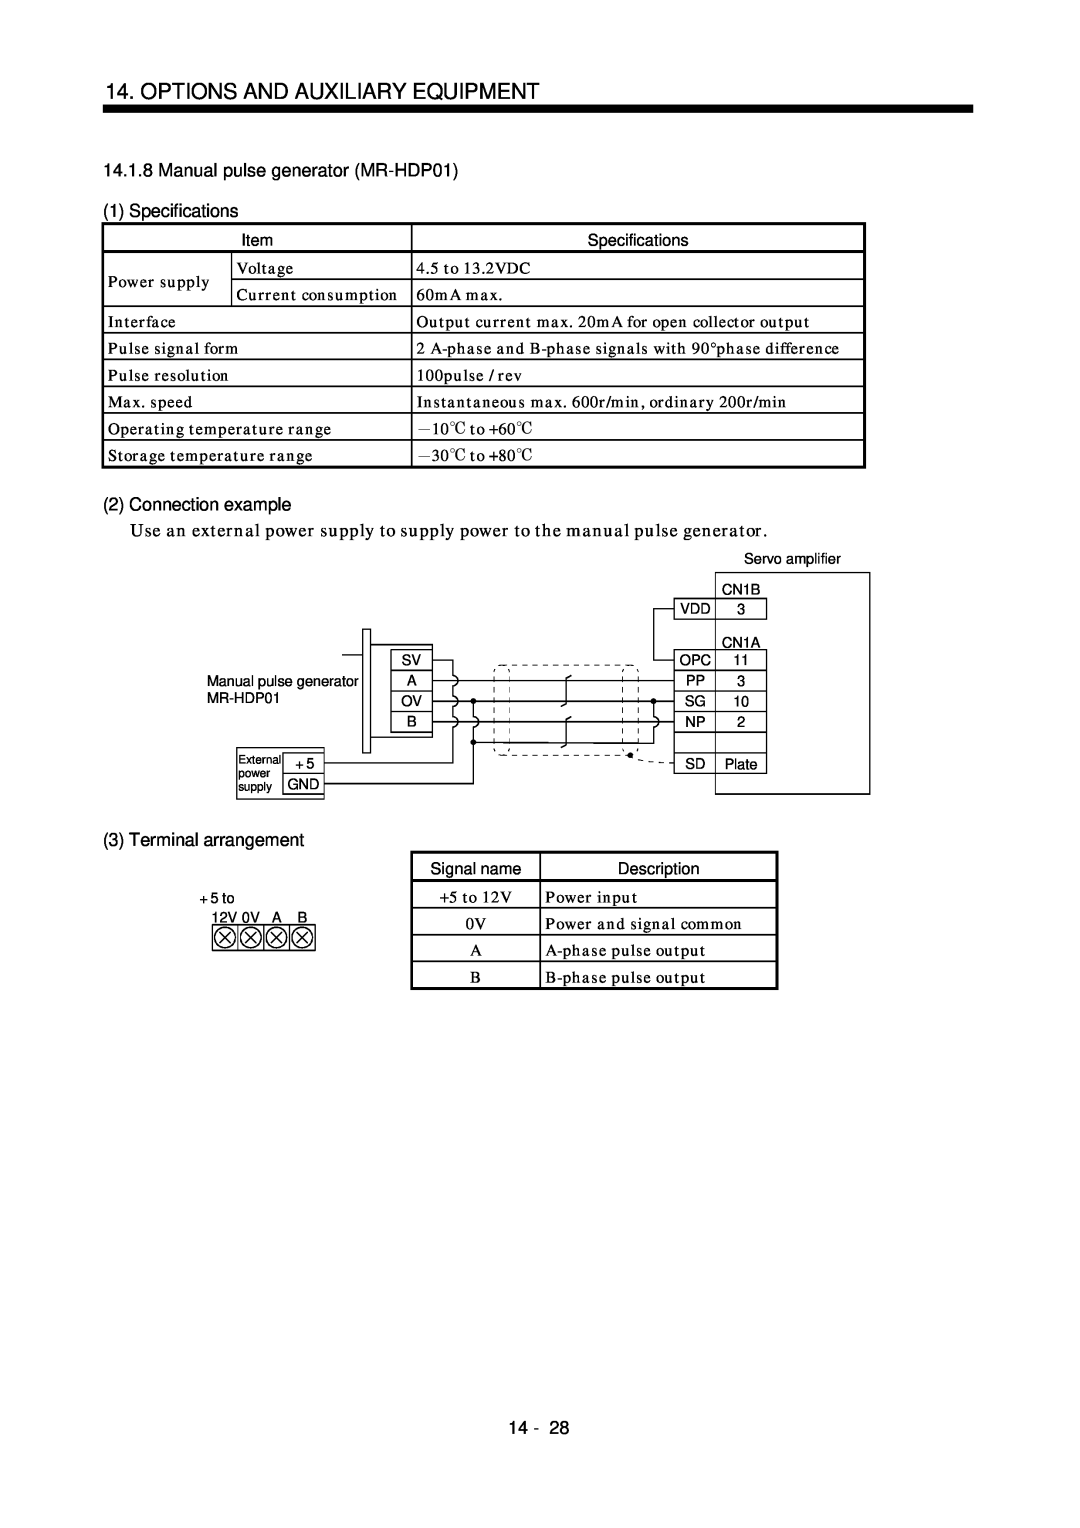 Mitsubishi Electronics MR-J2S- CL Manual pulse generator MR-HDP01, 2Connection example, Options And Auxiliary Equipment 